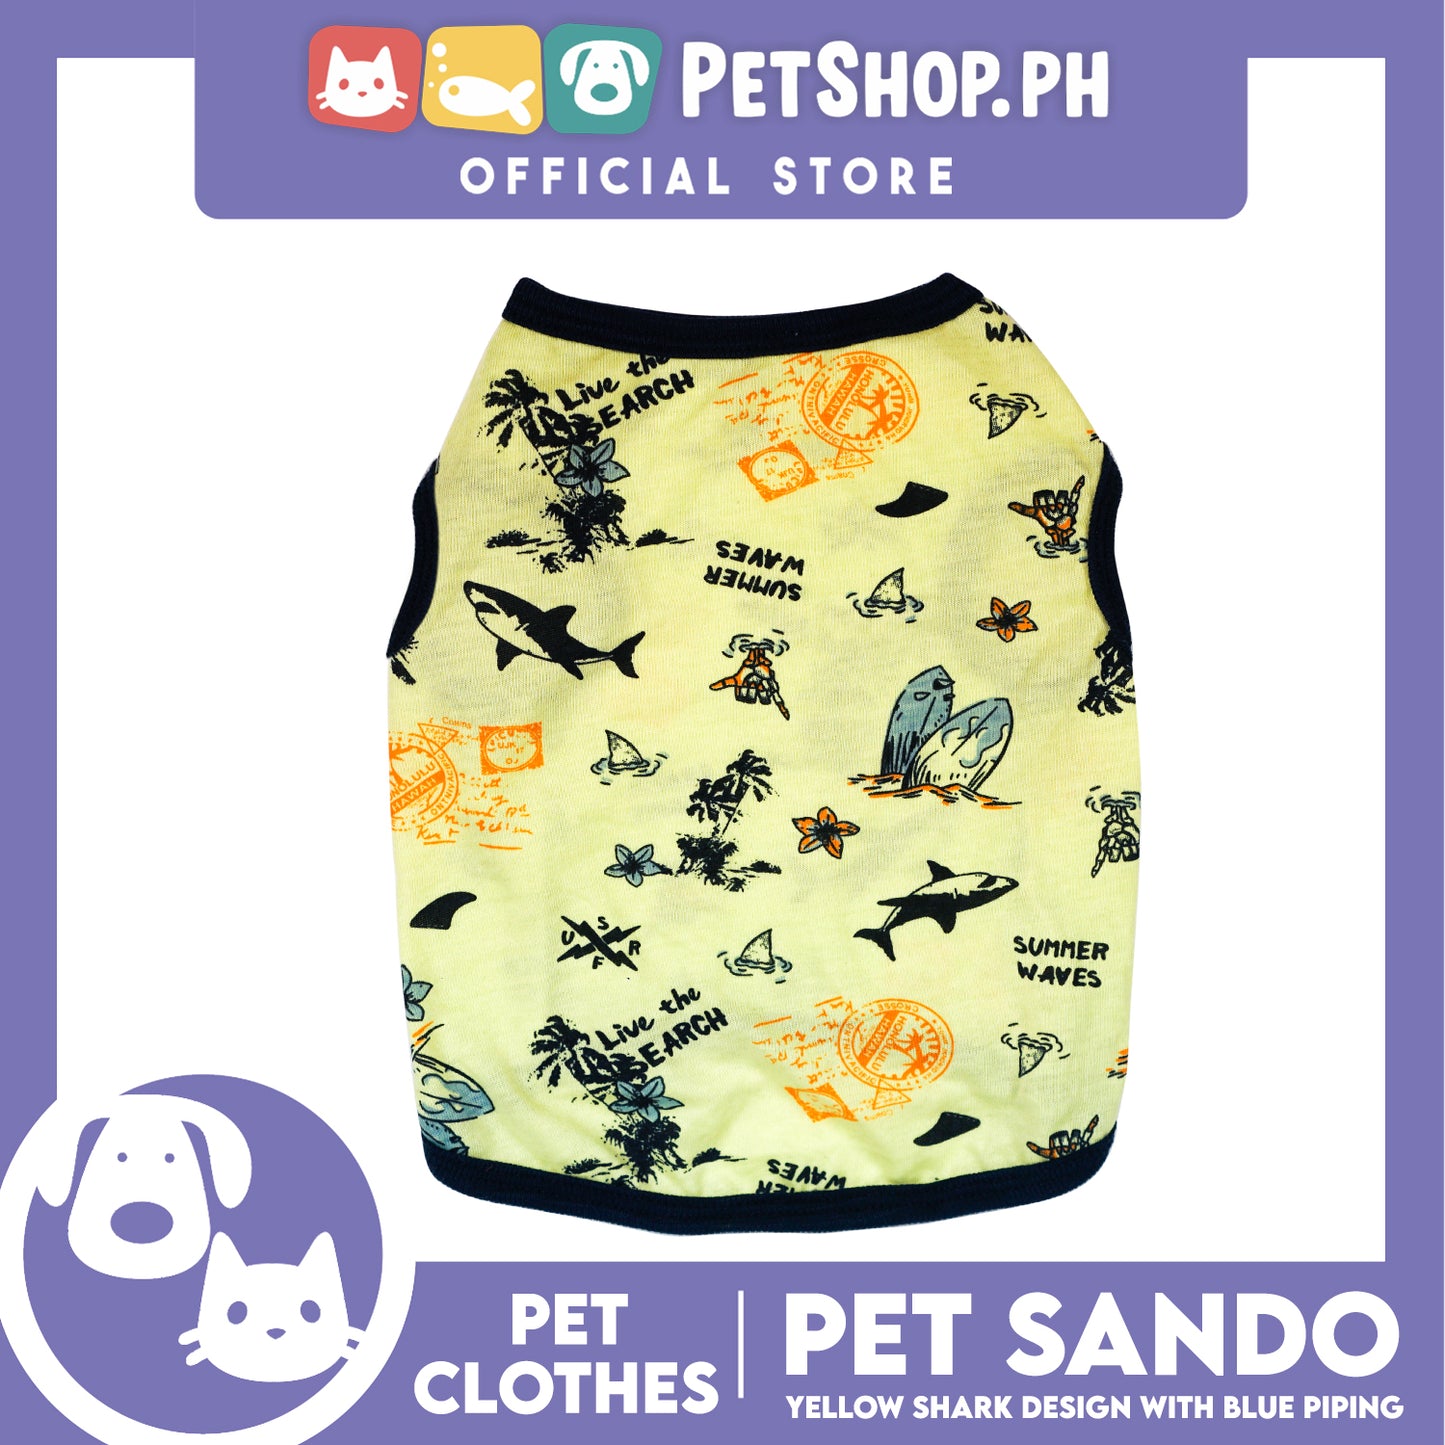 Pet Sando Yellow Shark Print with Blue Piping Pet Clothes (Medium) Perfect Fit for Dogs and Cats